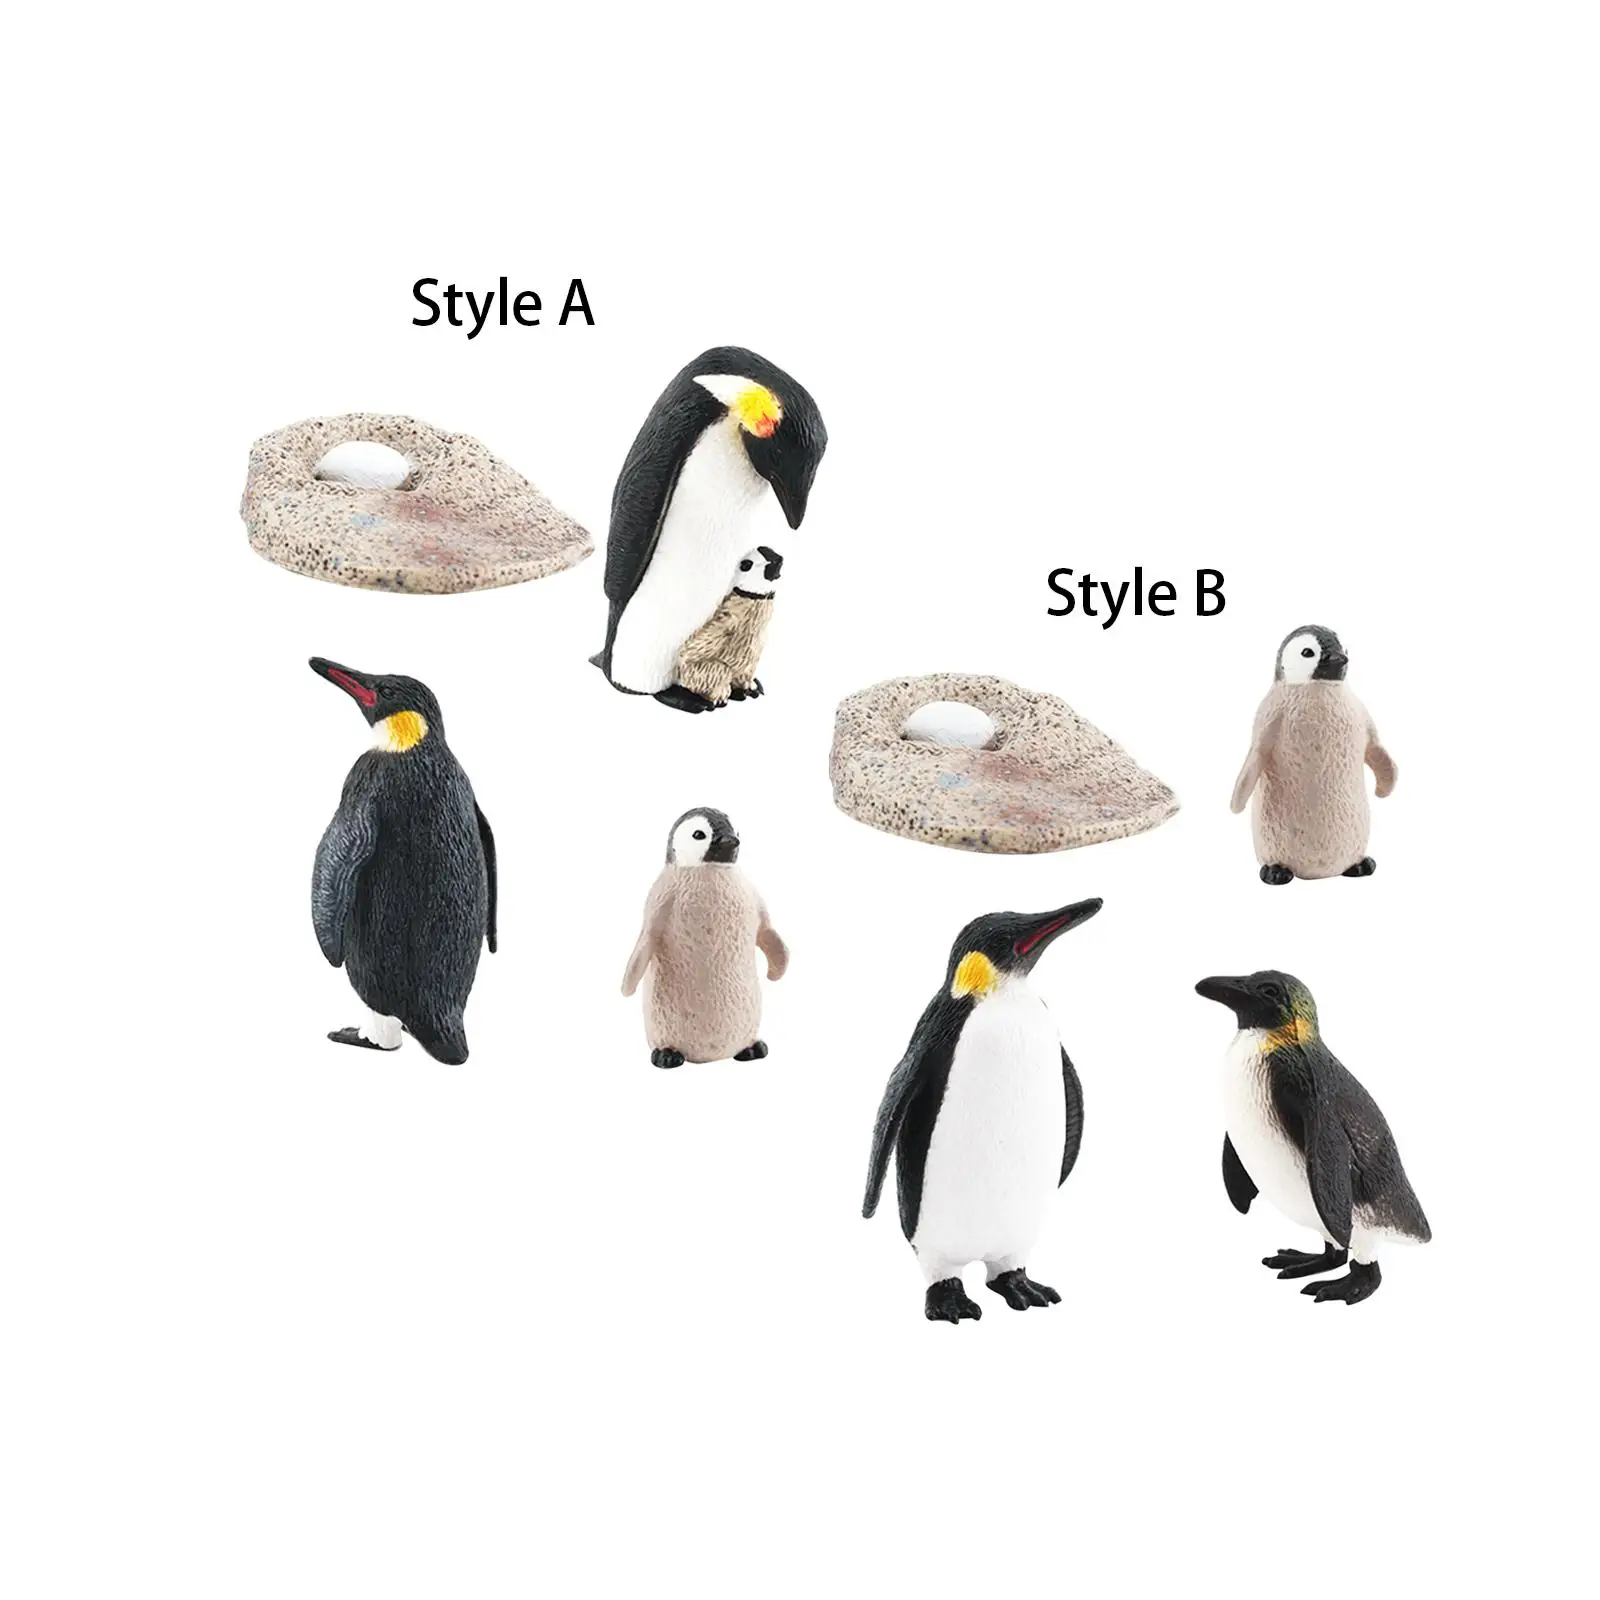 Penguin, Realistic Animal Figures, Del Figures, Science Toys, 4 Stages for Development Toys